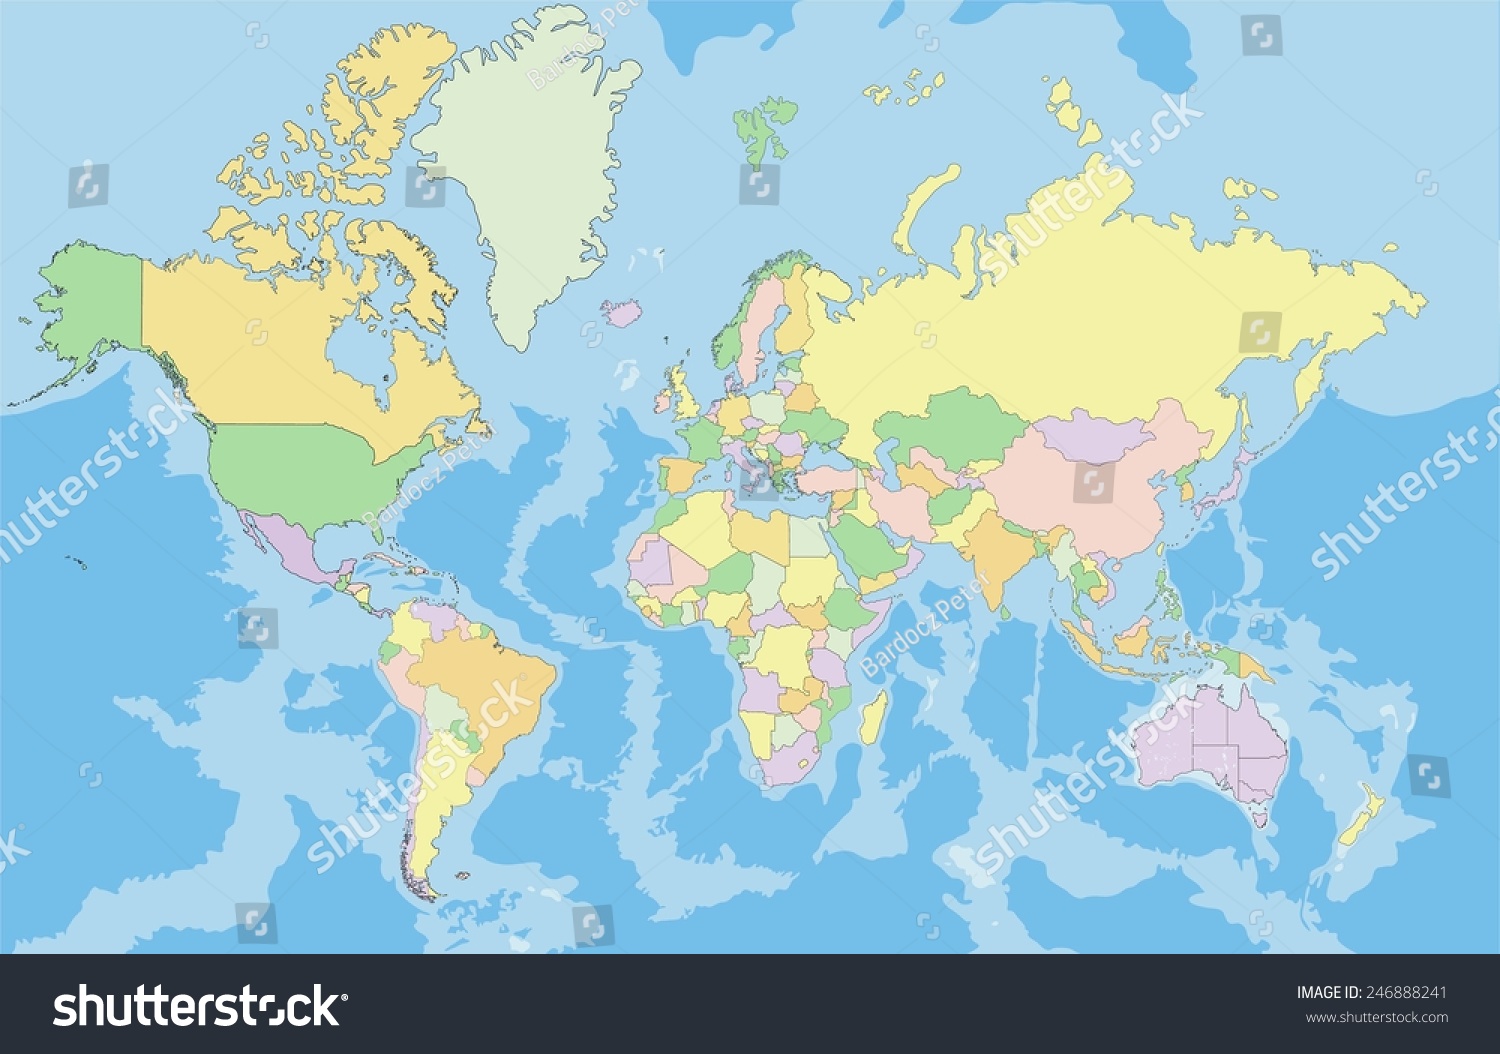 Highly Detailed Political World Map Vector Royalty Free Stock Vector